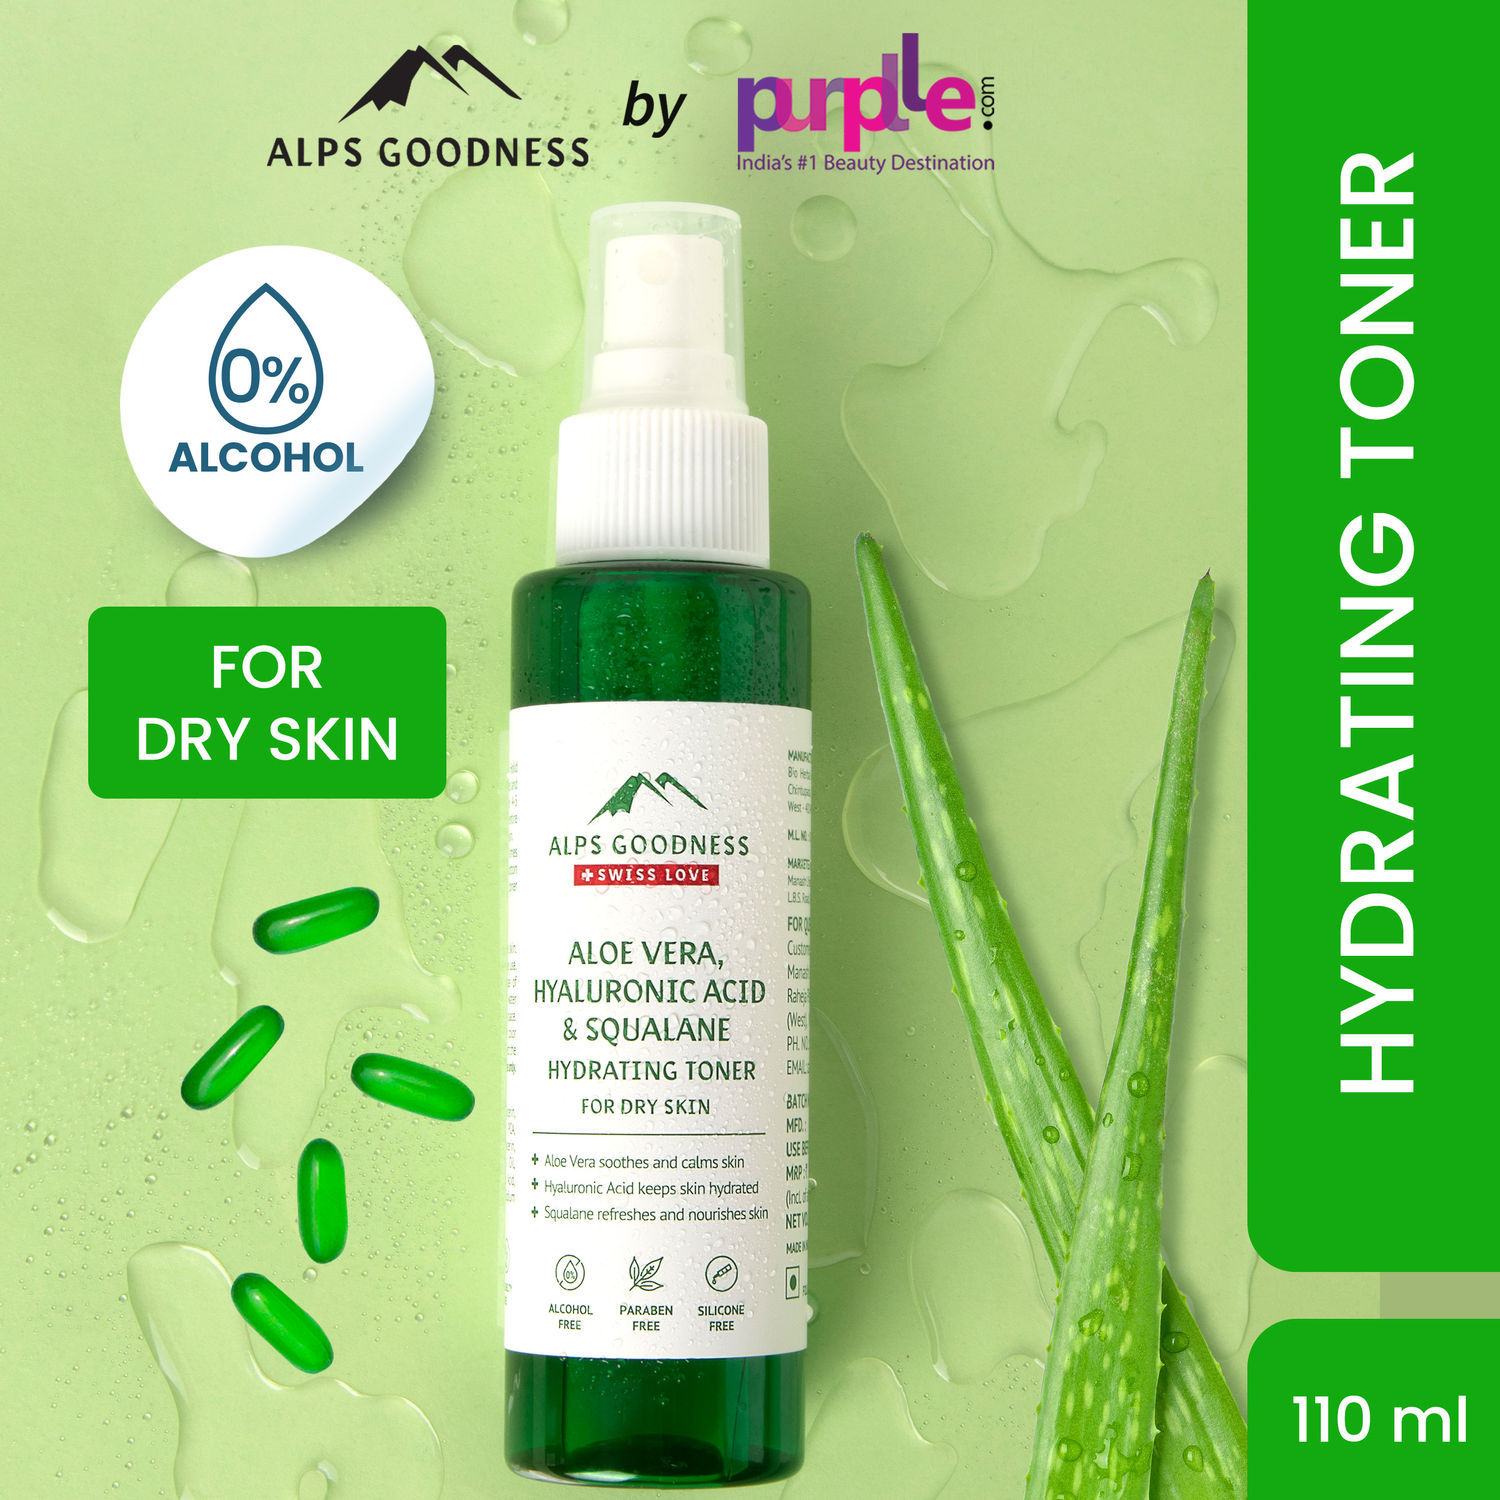 Buy Alps Goodness Aloe Vera Squalane & Hyaluronic Acid Hydrating Toner for Dry Skin (110ml) | Alcohol free Paraben Free Sulphate Free Silicone Free | Good for pore minimizing/tightening - Purplle